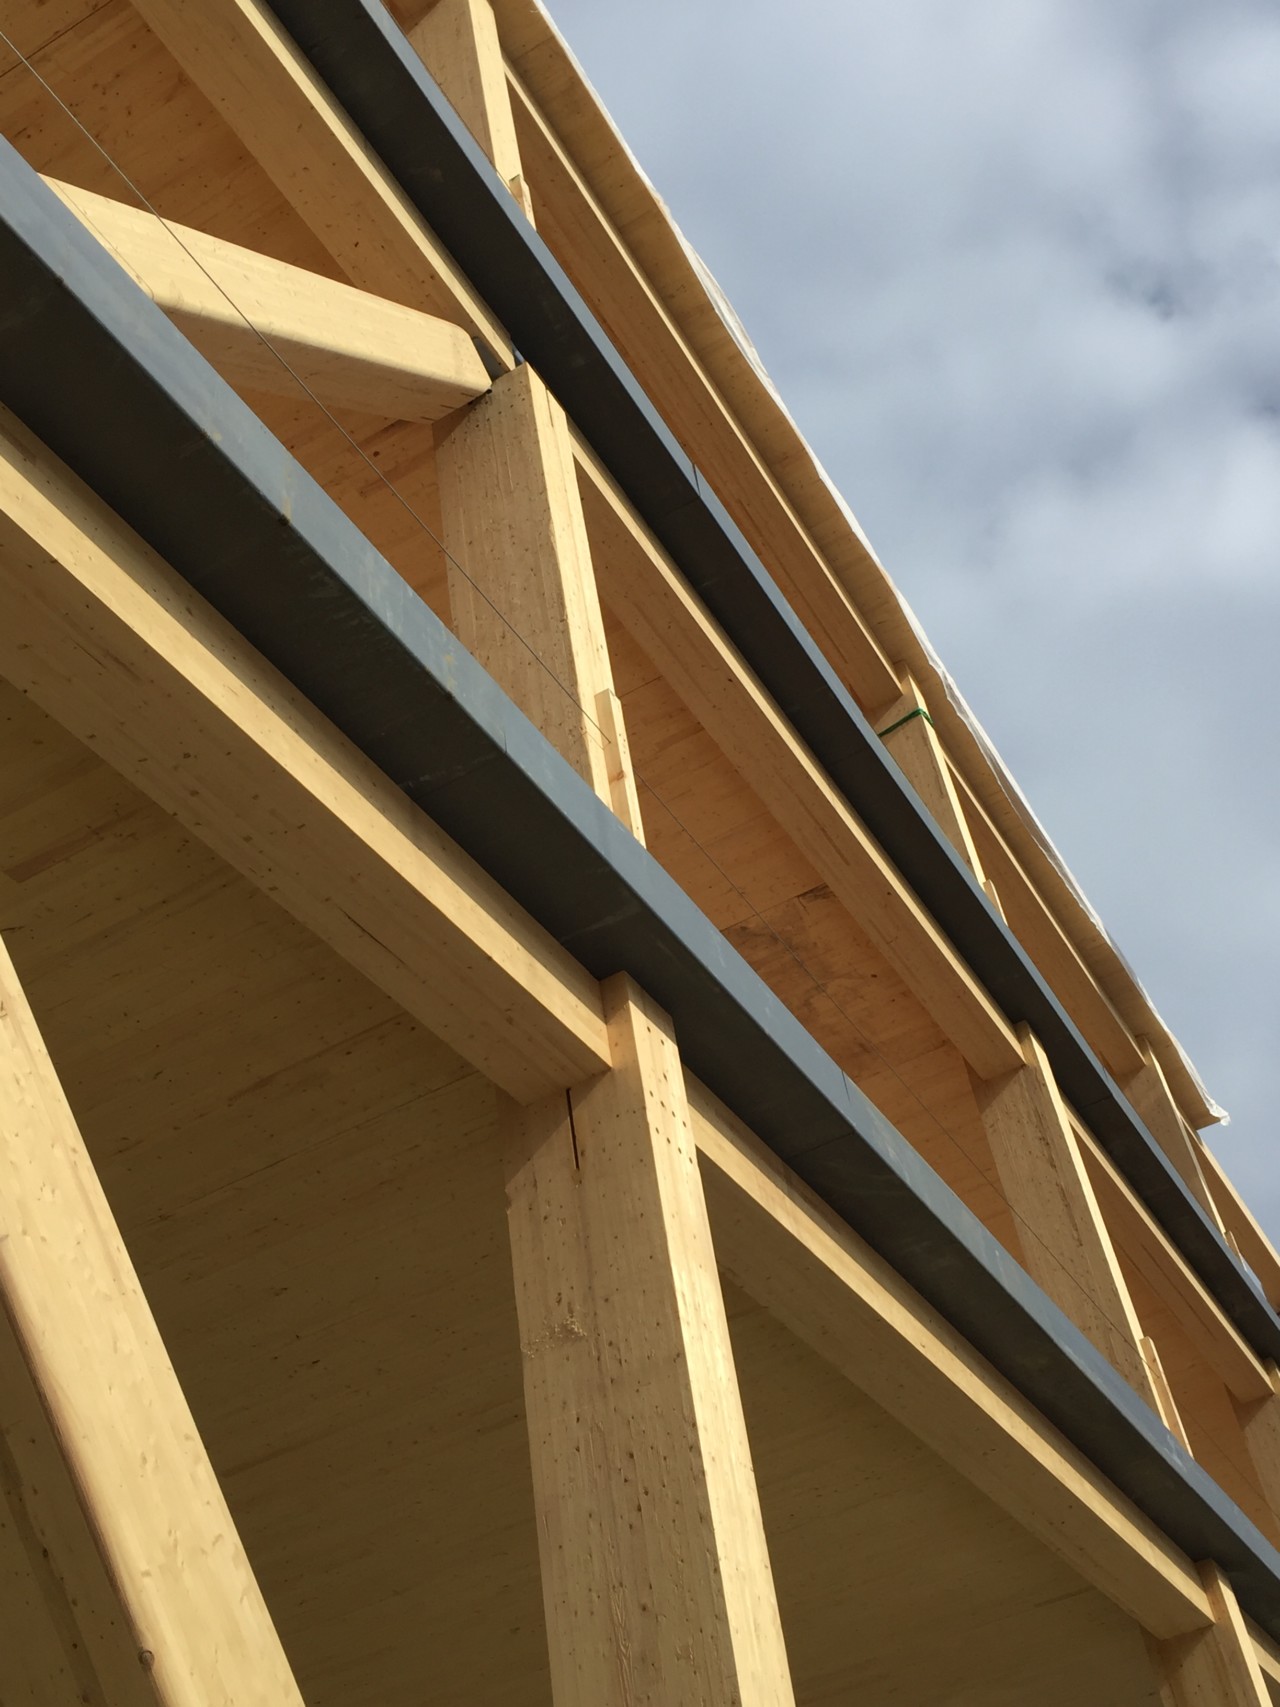 Image of the project's glulam structural system